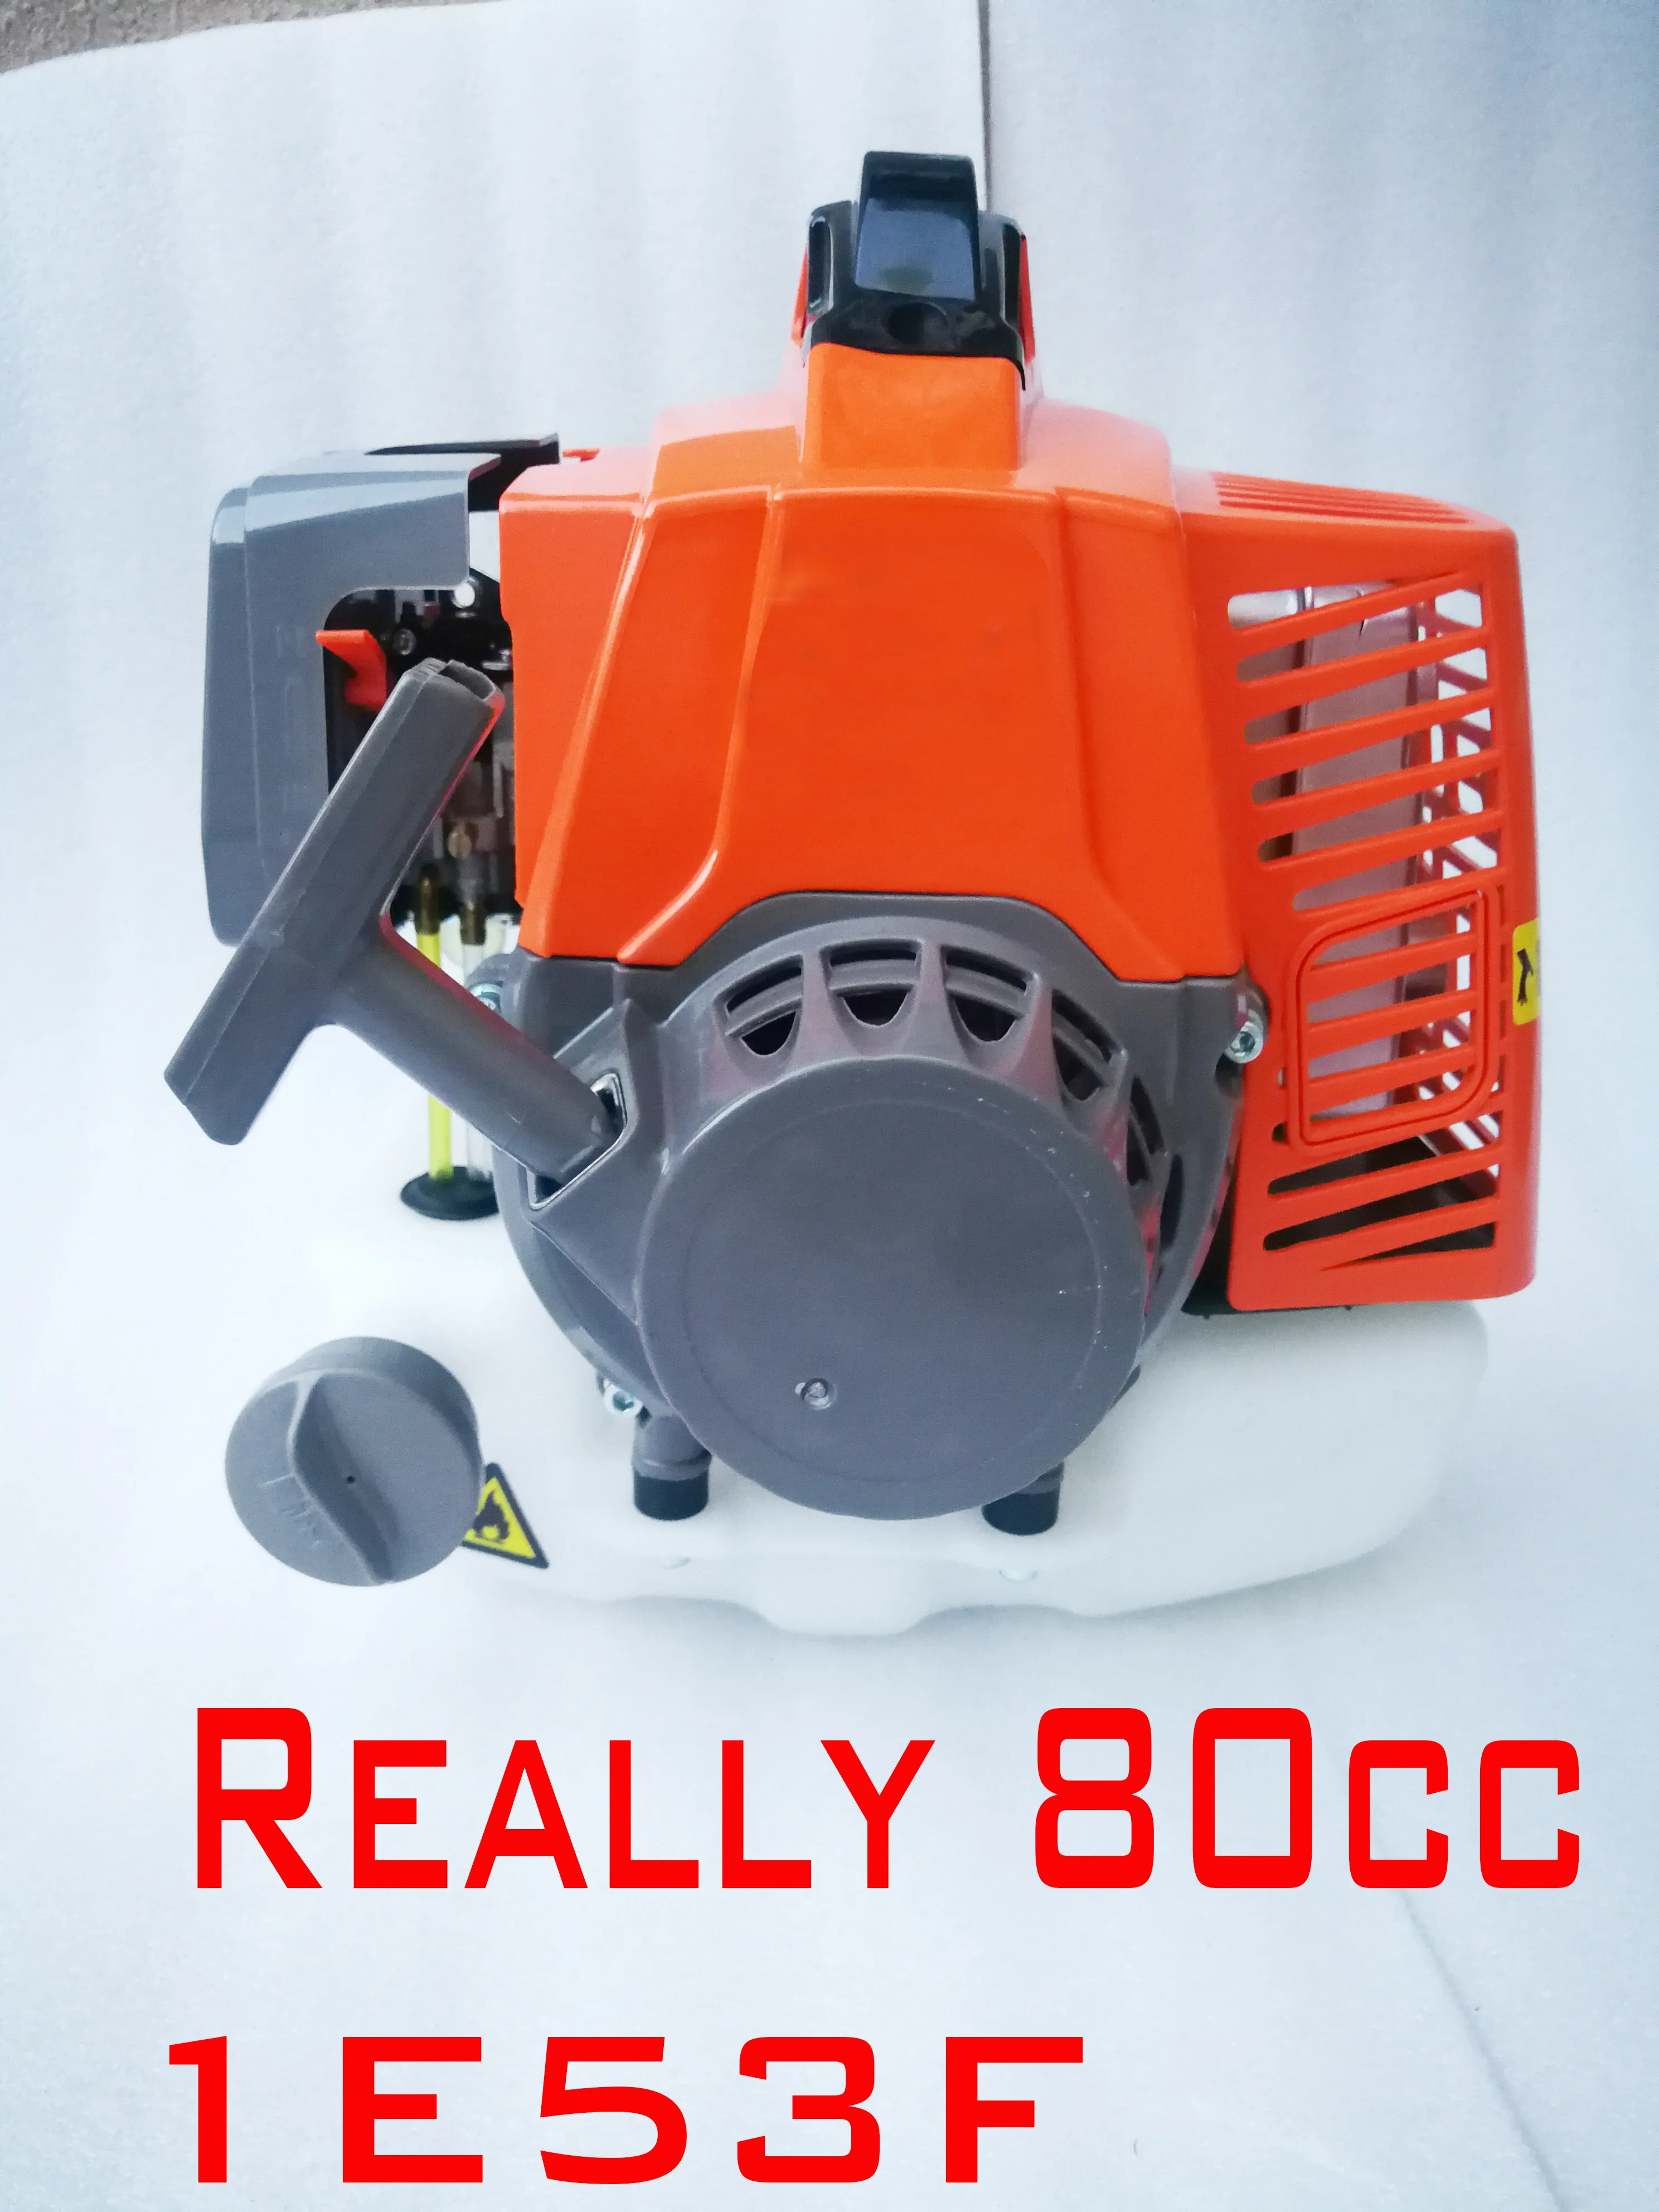 80CC Engine 2T Motor Petrol Brush Cutter Auger Scooter Motorbike Outboard Hugh Power Not 71cc 63cc Goped 3.5HP